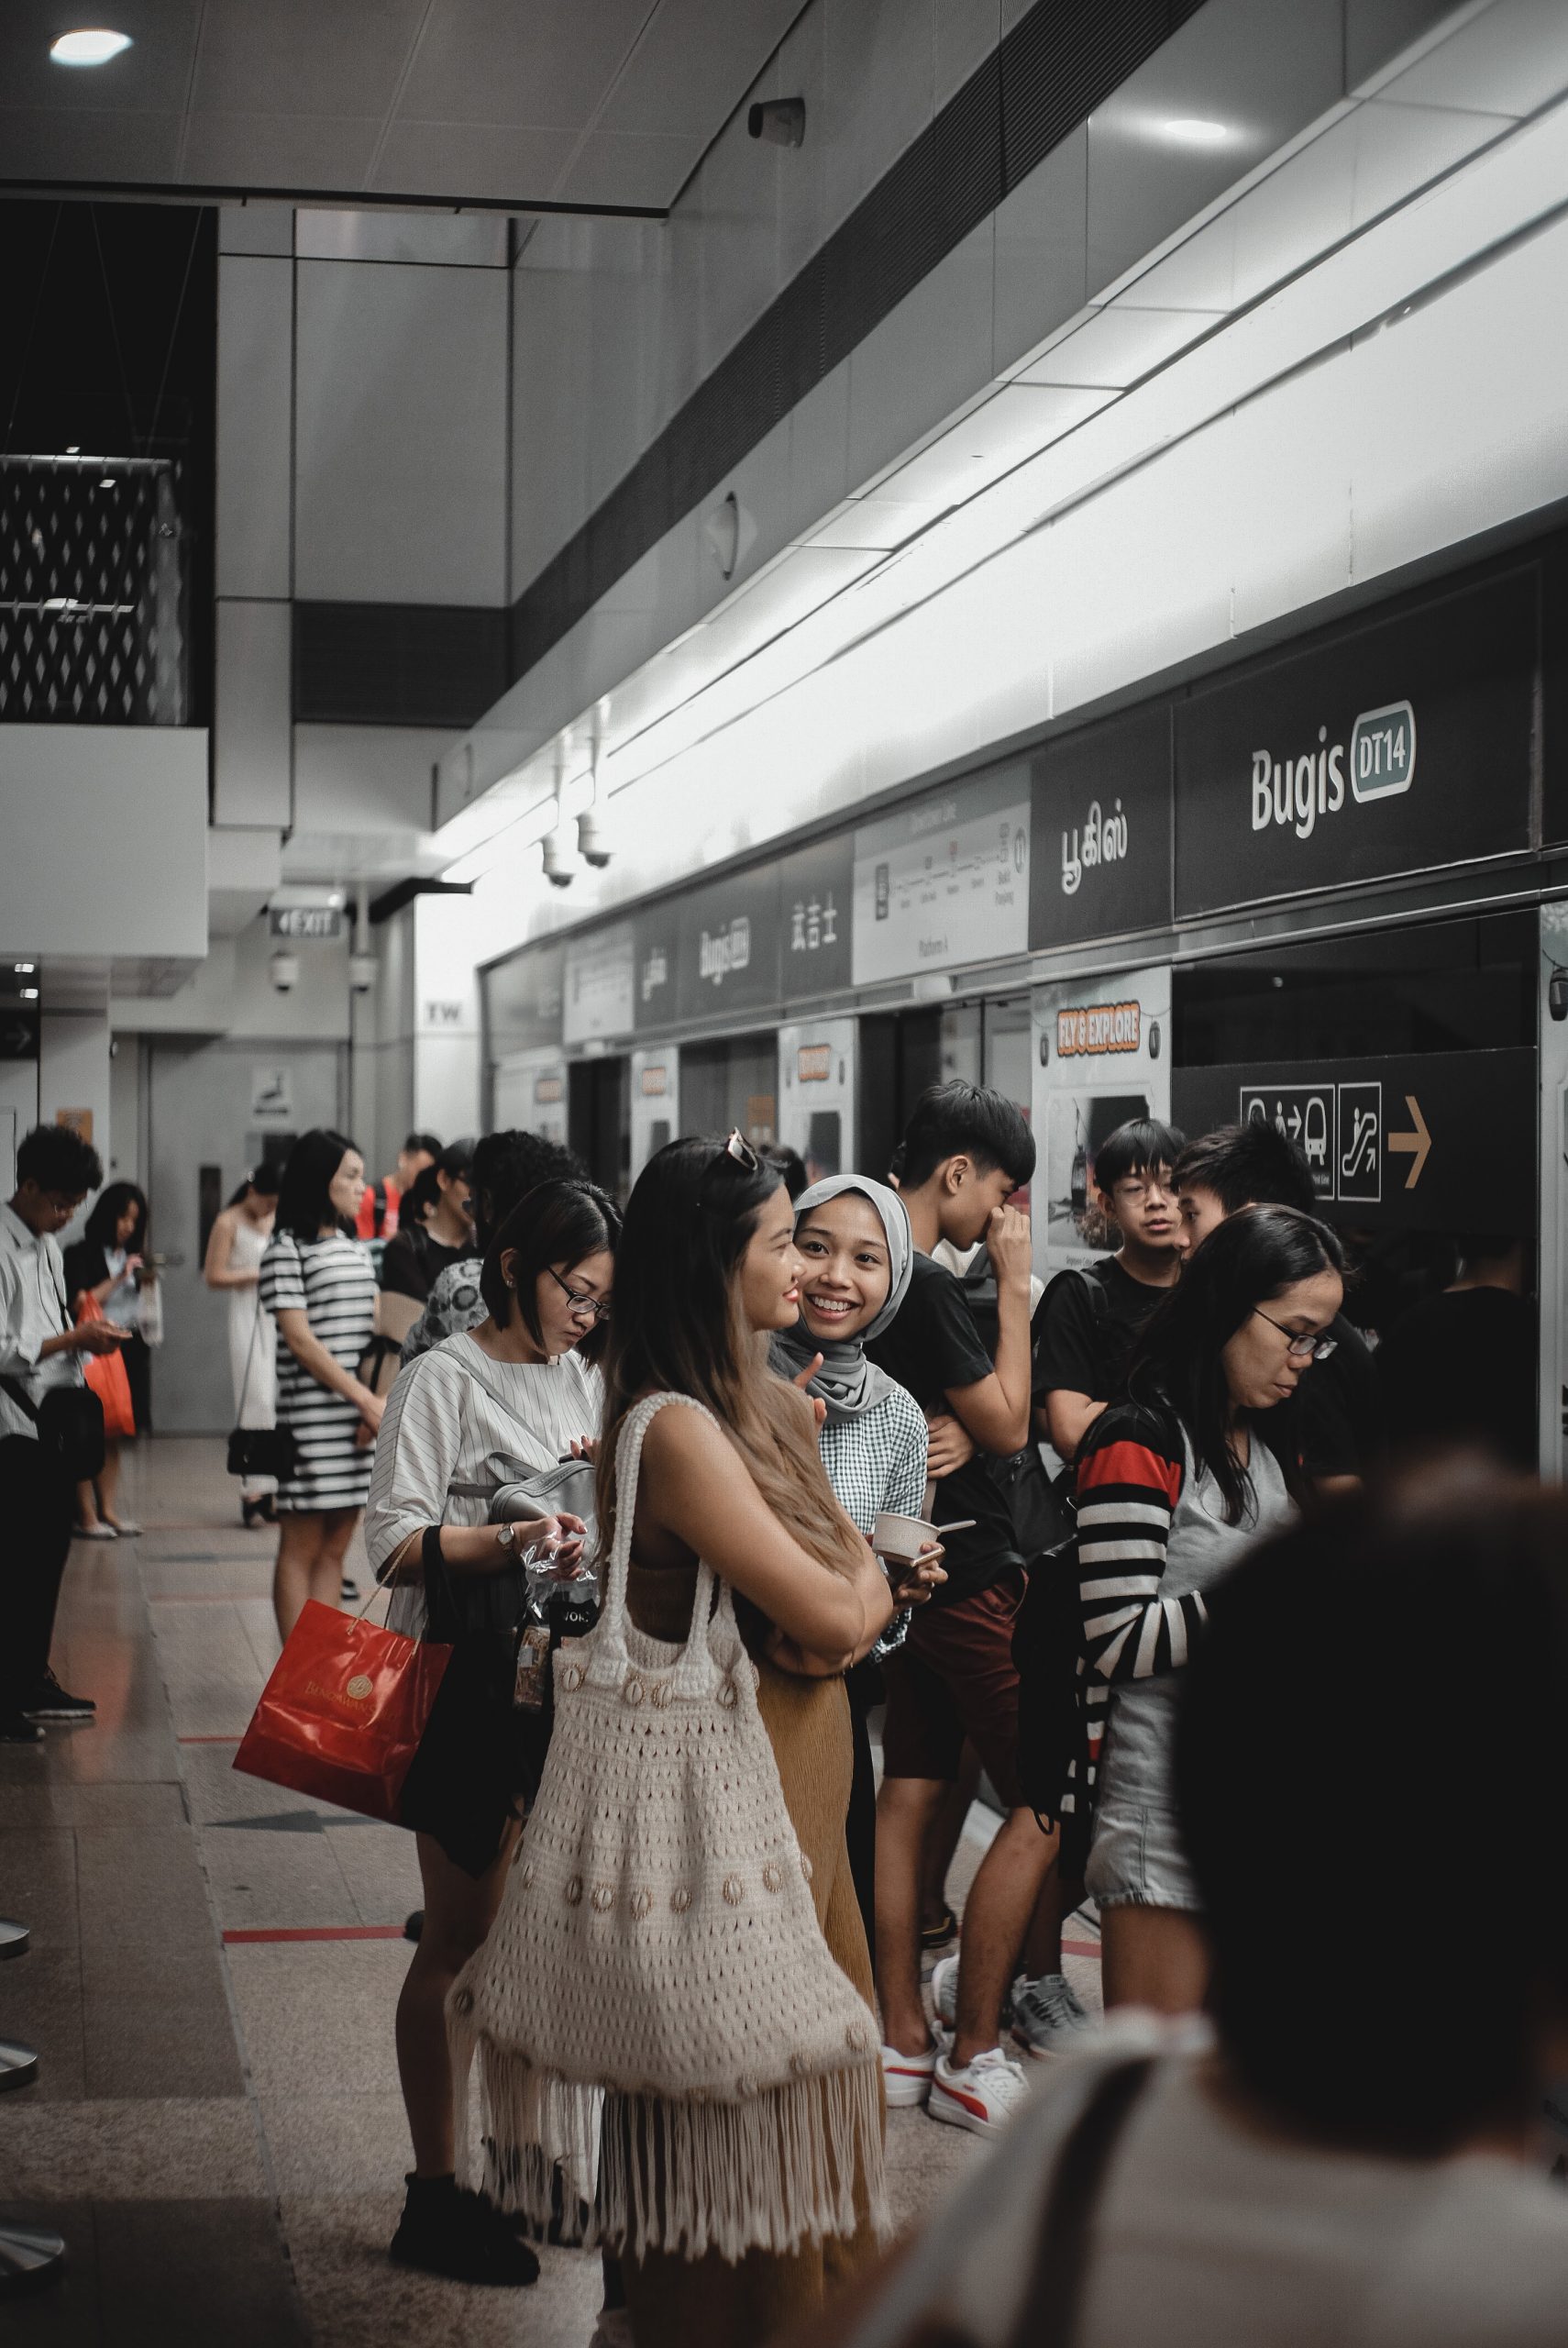 Friendly people in Singapore - 10 Reasons To Visit Singapore in 2023